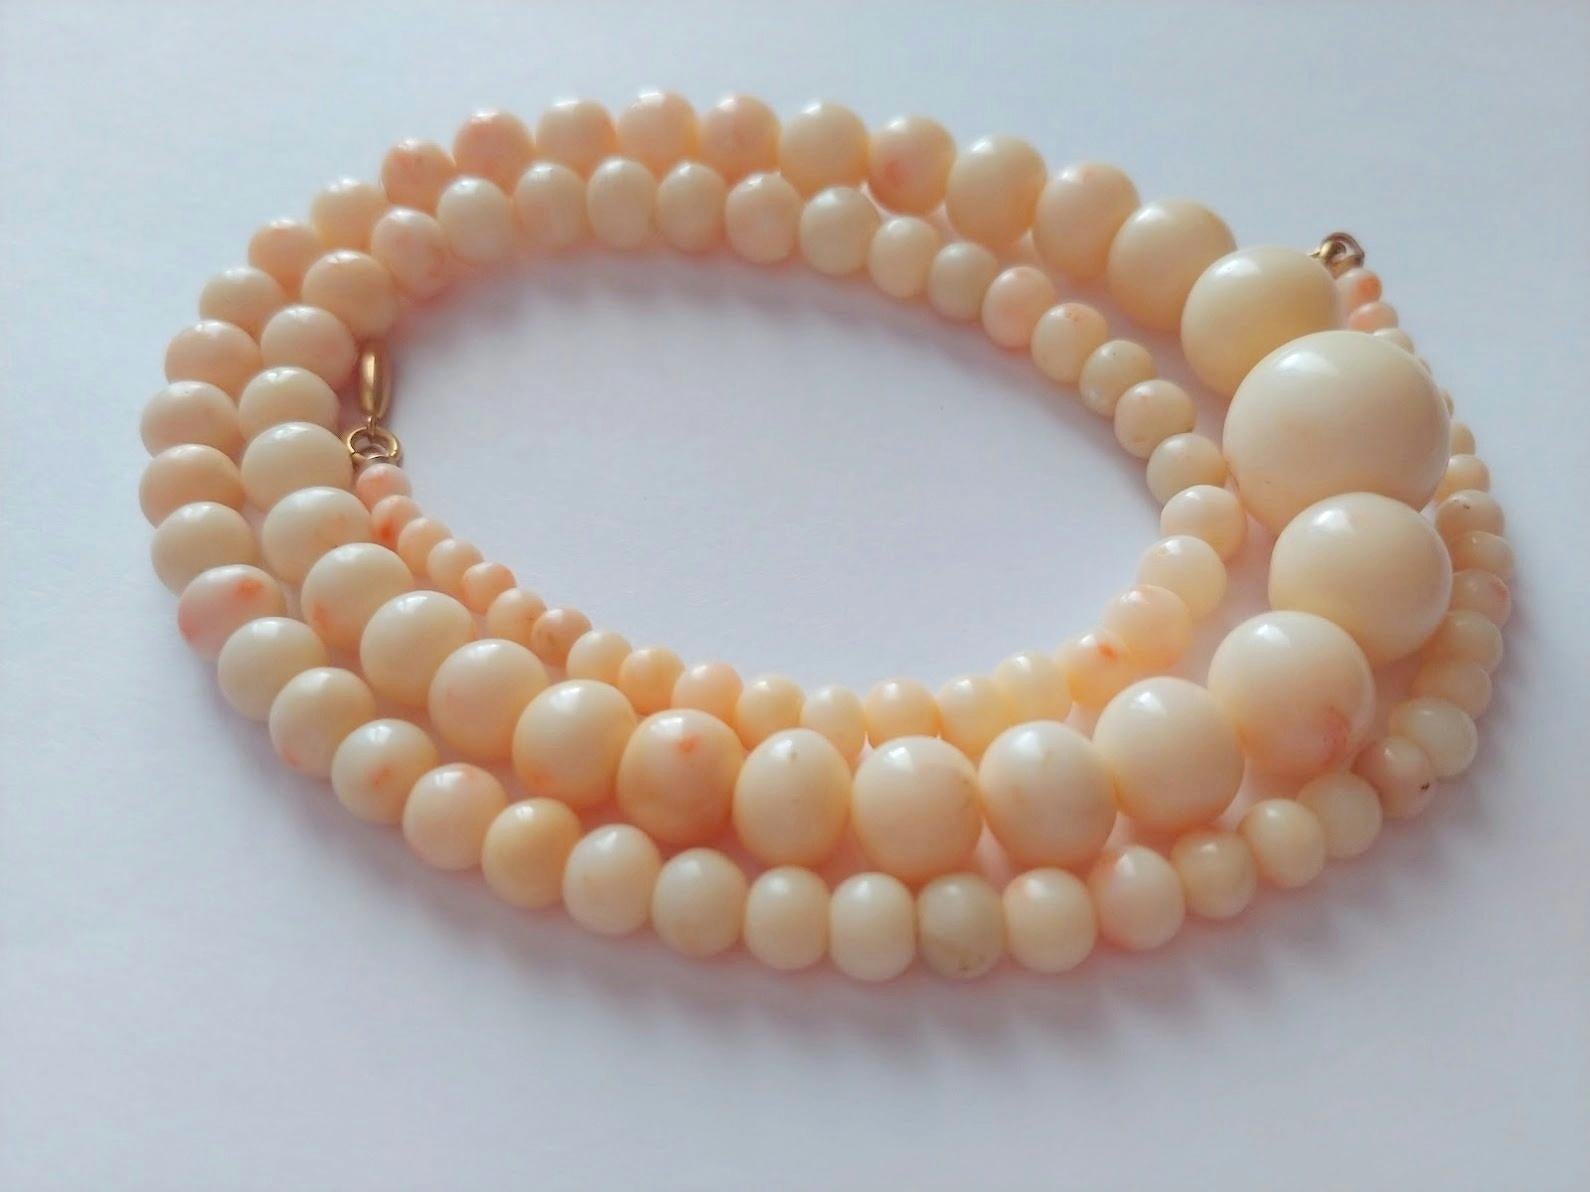 Clothes, and especially jewelry, affect our mood. 
By wearing an antique coral necklace and white pants, you agree in advance that today is not the time to worry about anything.

This coral necklace was found in a box containing an antique